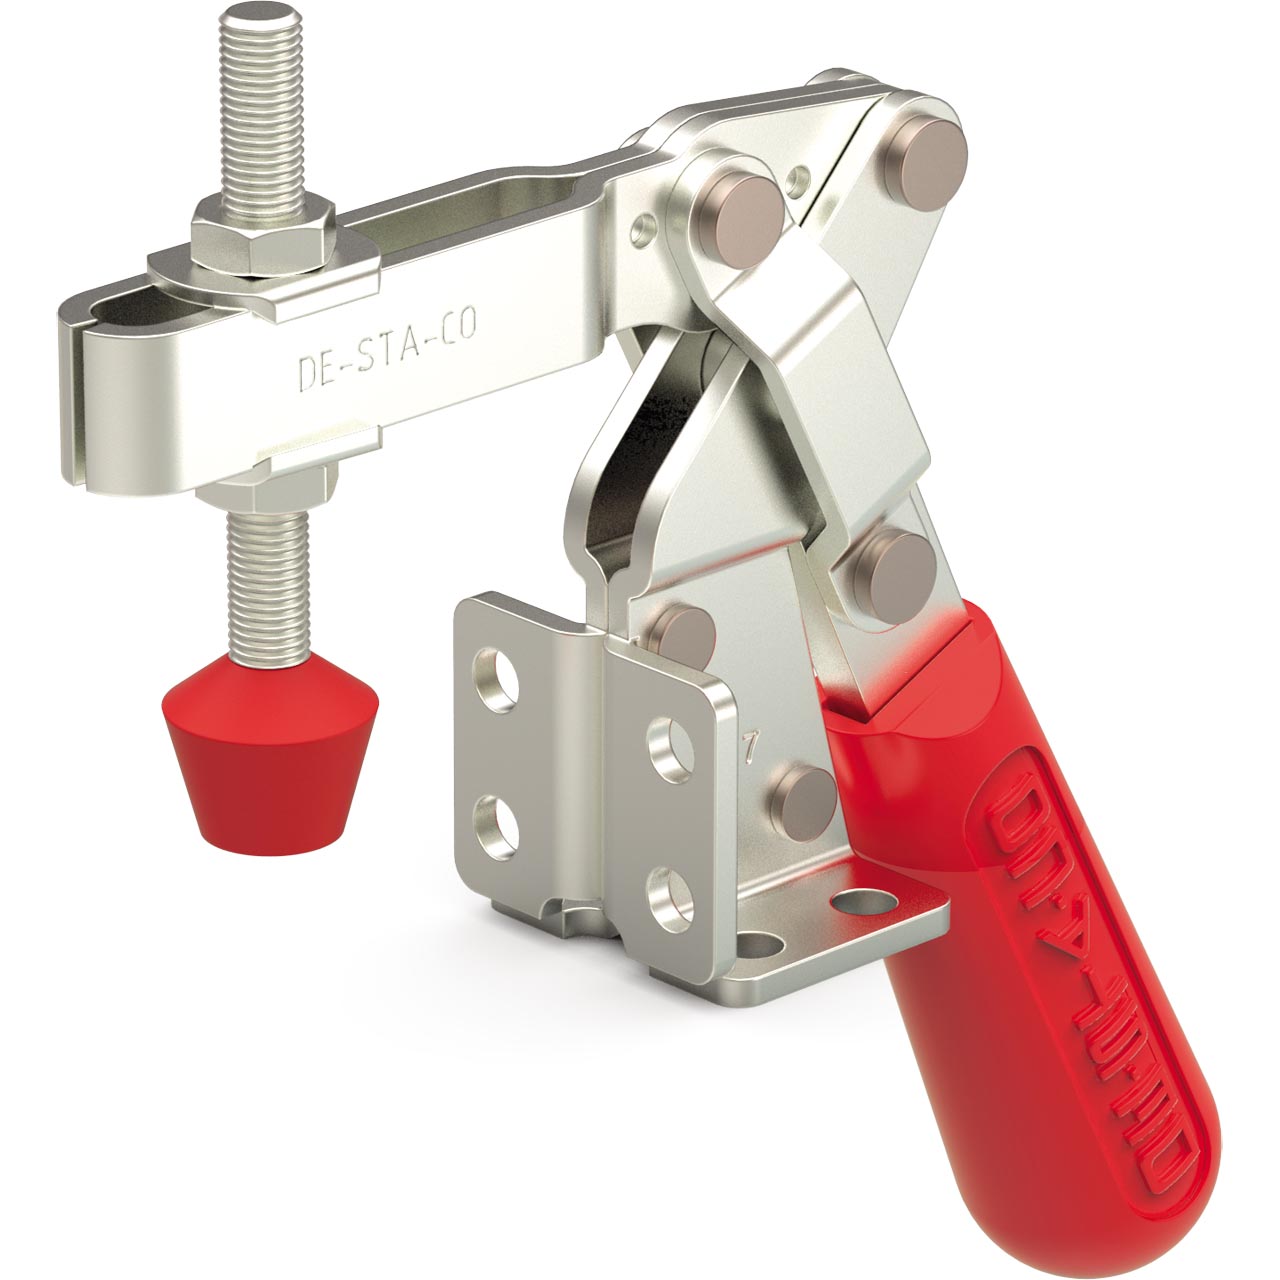 Toggle Clamps - Manual & Push-Pull Toggle Clamps